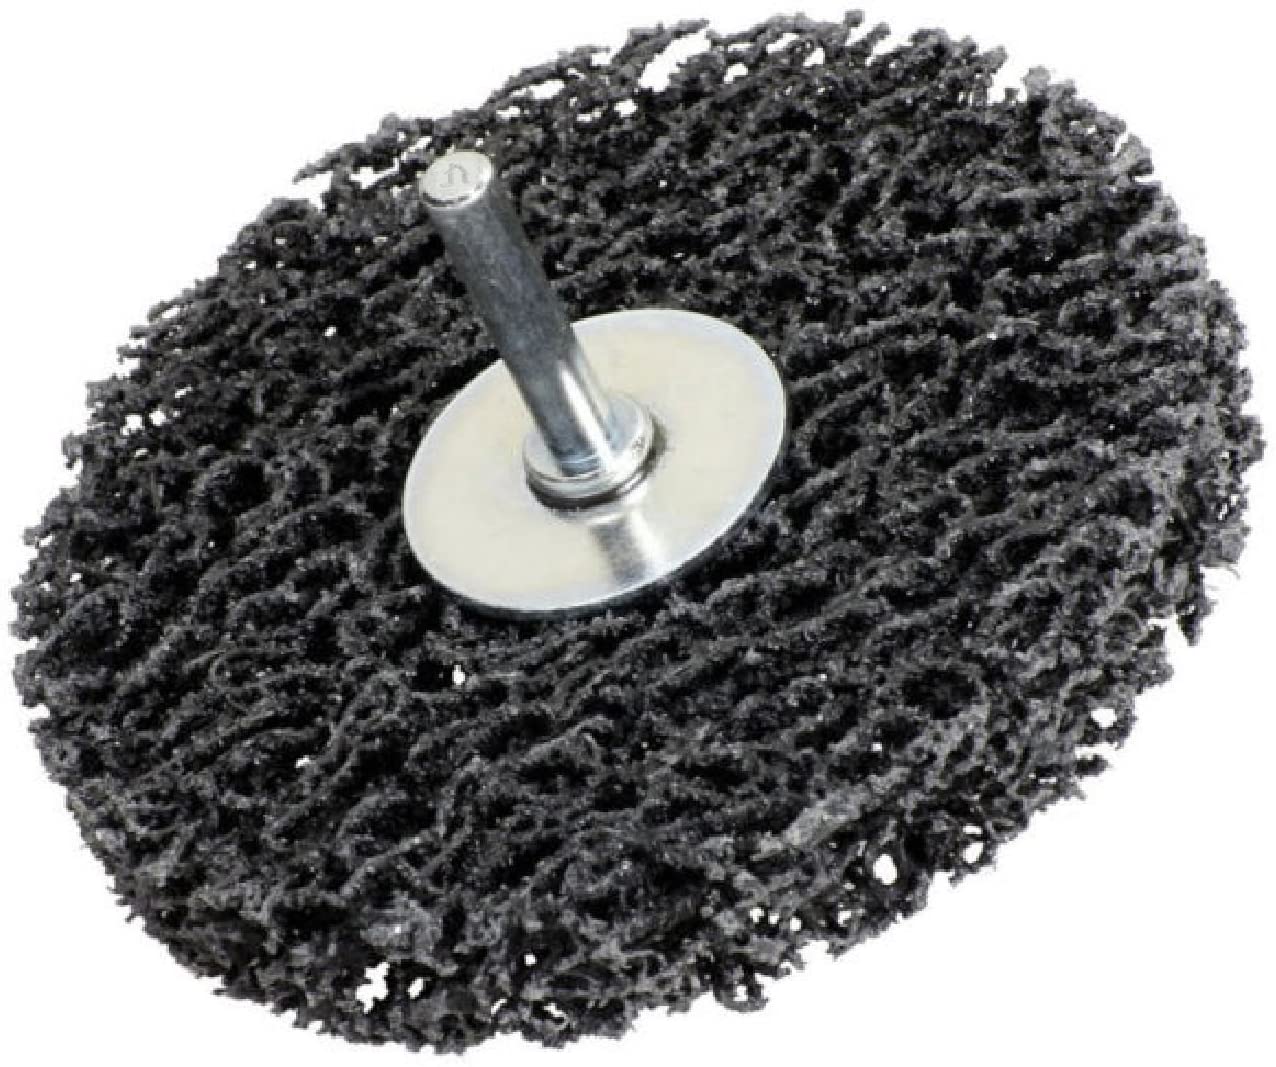 Rust / Paint 100mm Remover Disc Wheels - Grinder/Drill Abrasive Stripping Bits